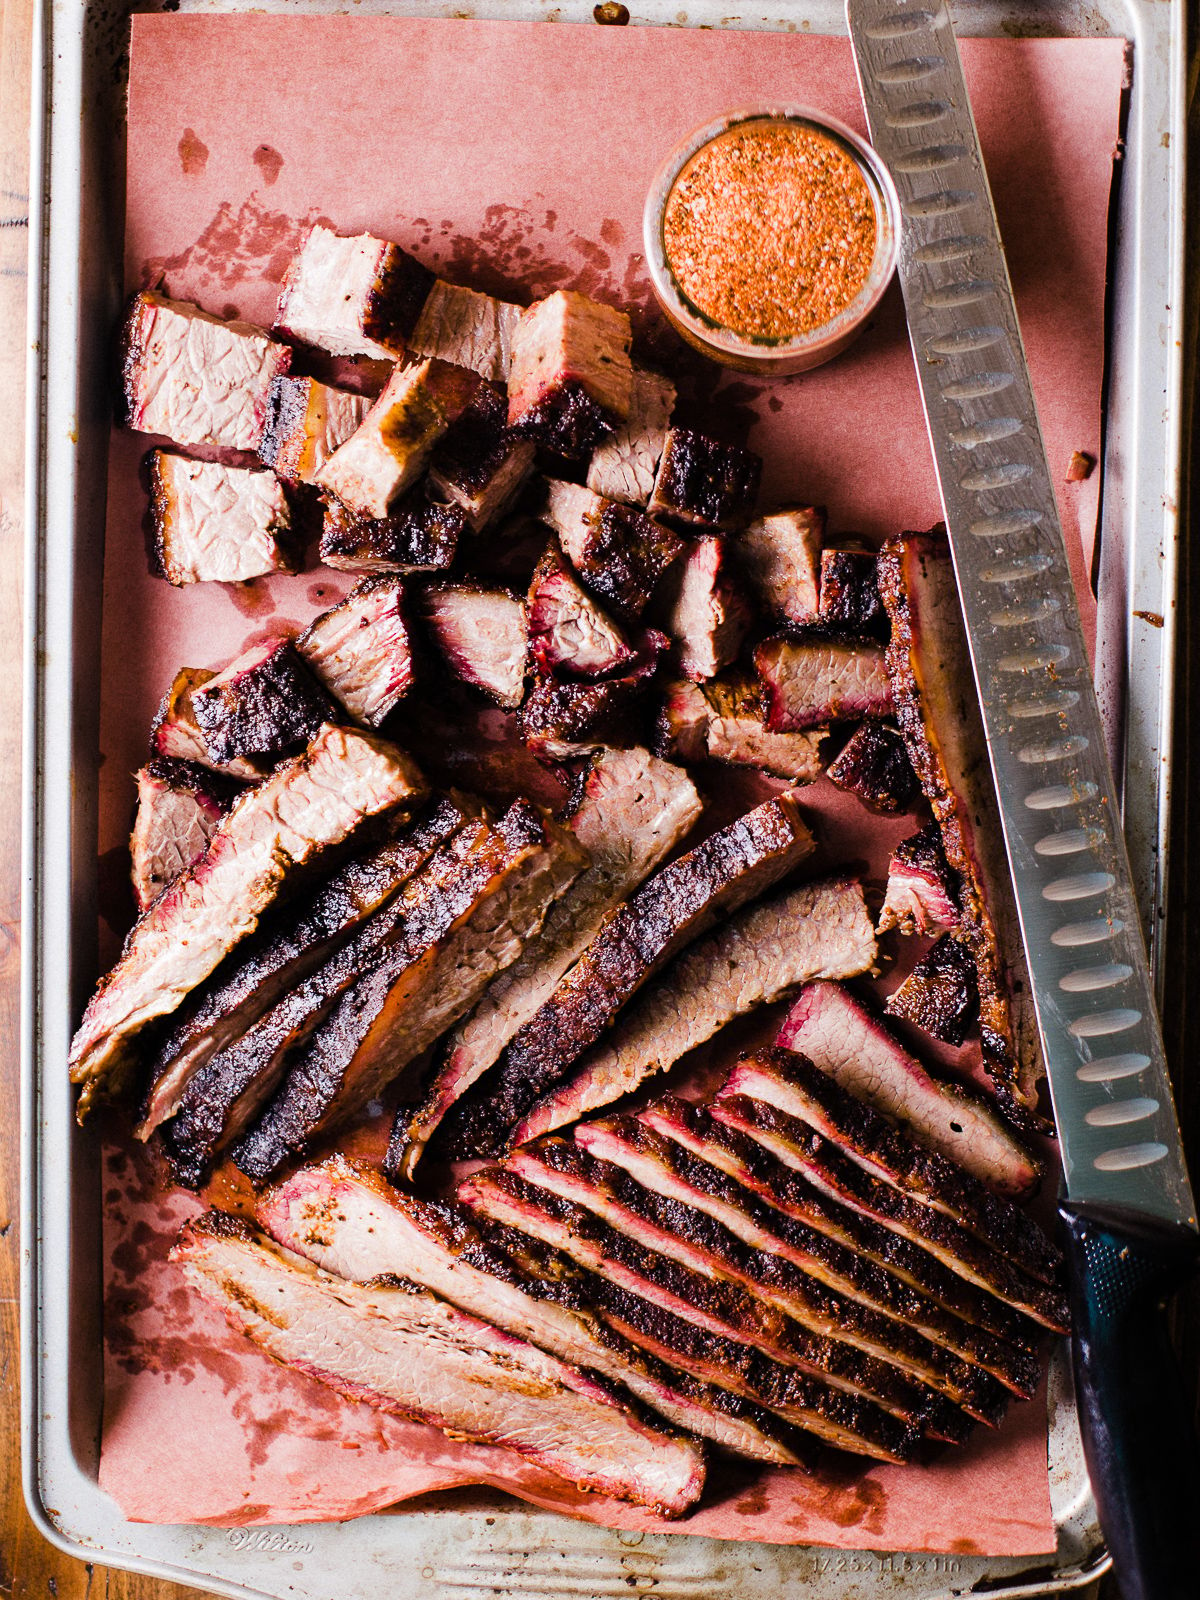 https://www.dadwithapan.com/cdn-cgi/image/width=1200,height=1600,fit=crop,quality=80,format=auto,onerror=redirect,metadata=none/wp-content/uploads/2018/09/Smoked-Brisket-Texas-Style-9.jpg